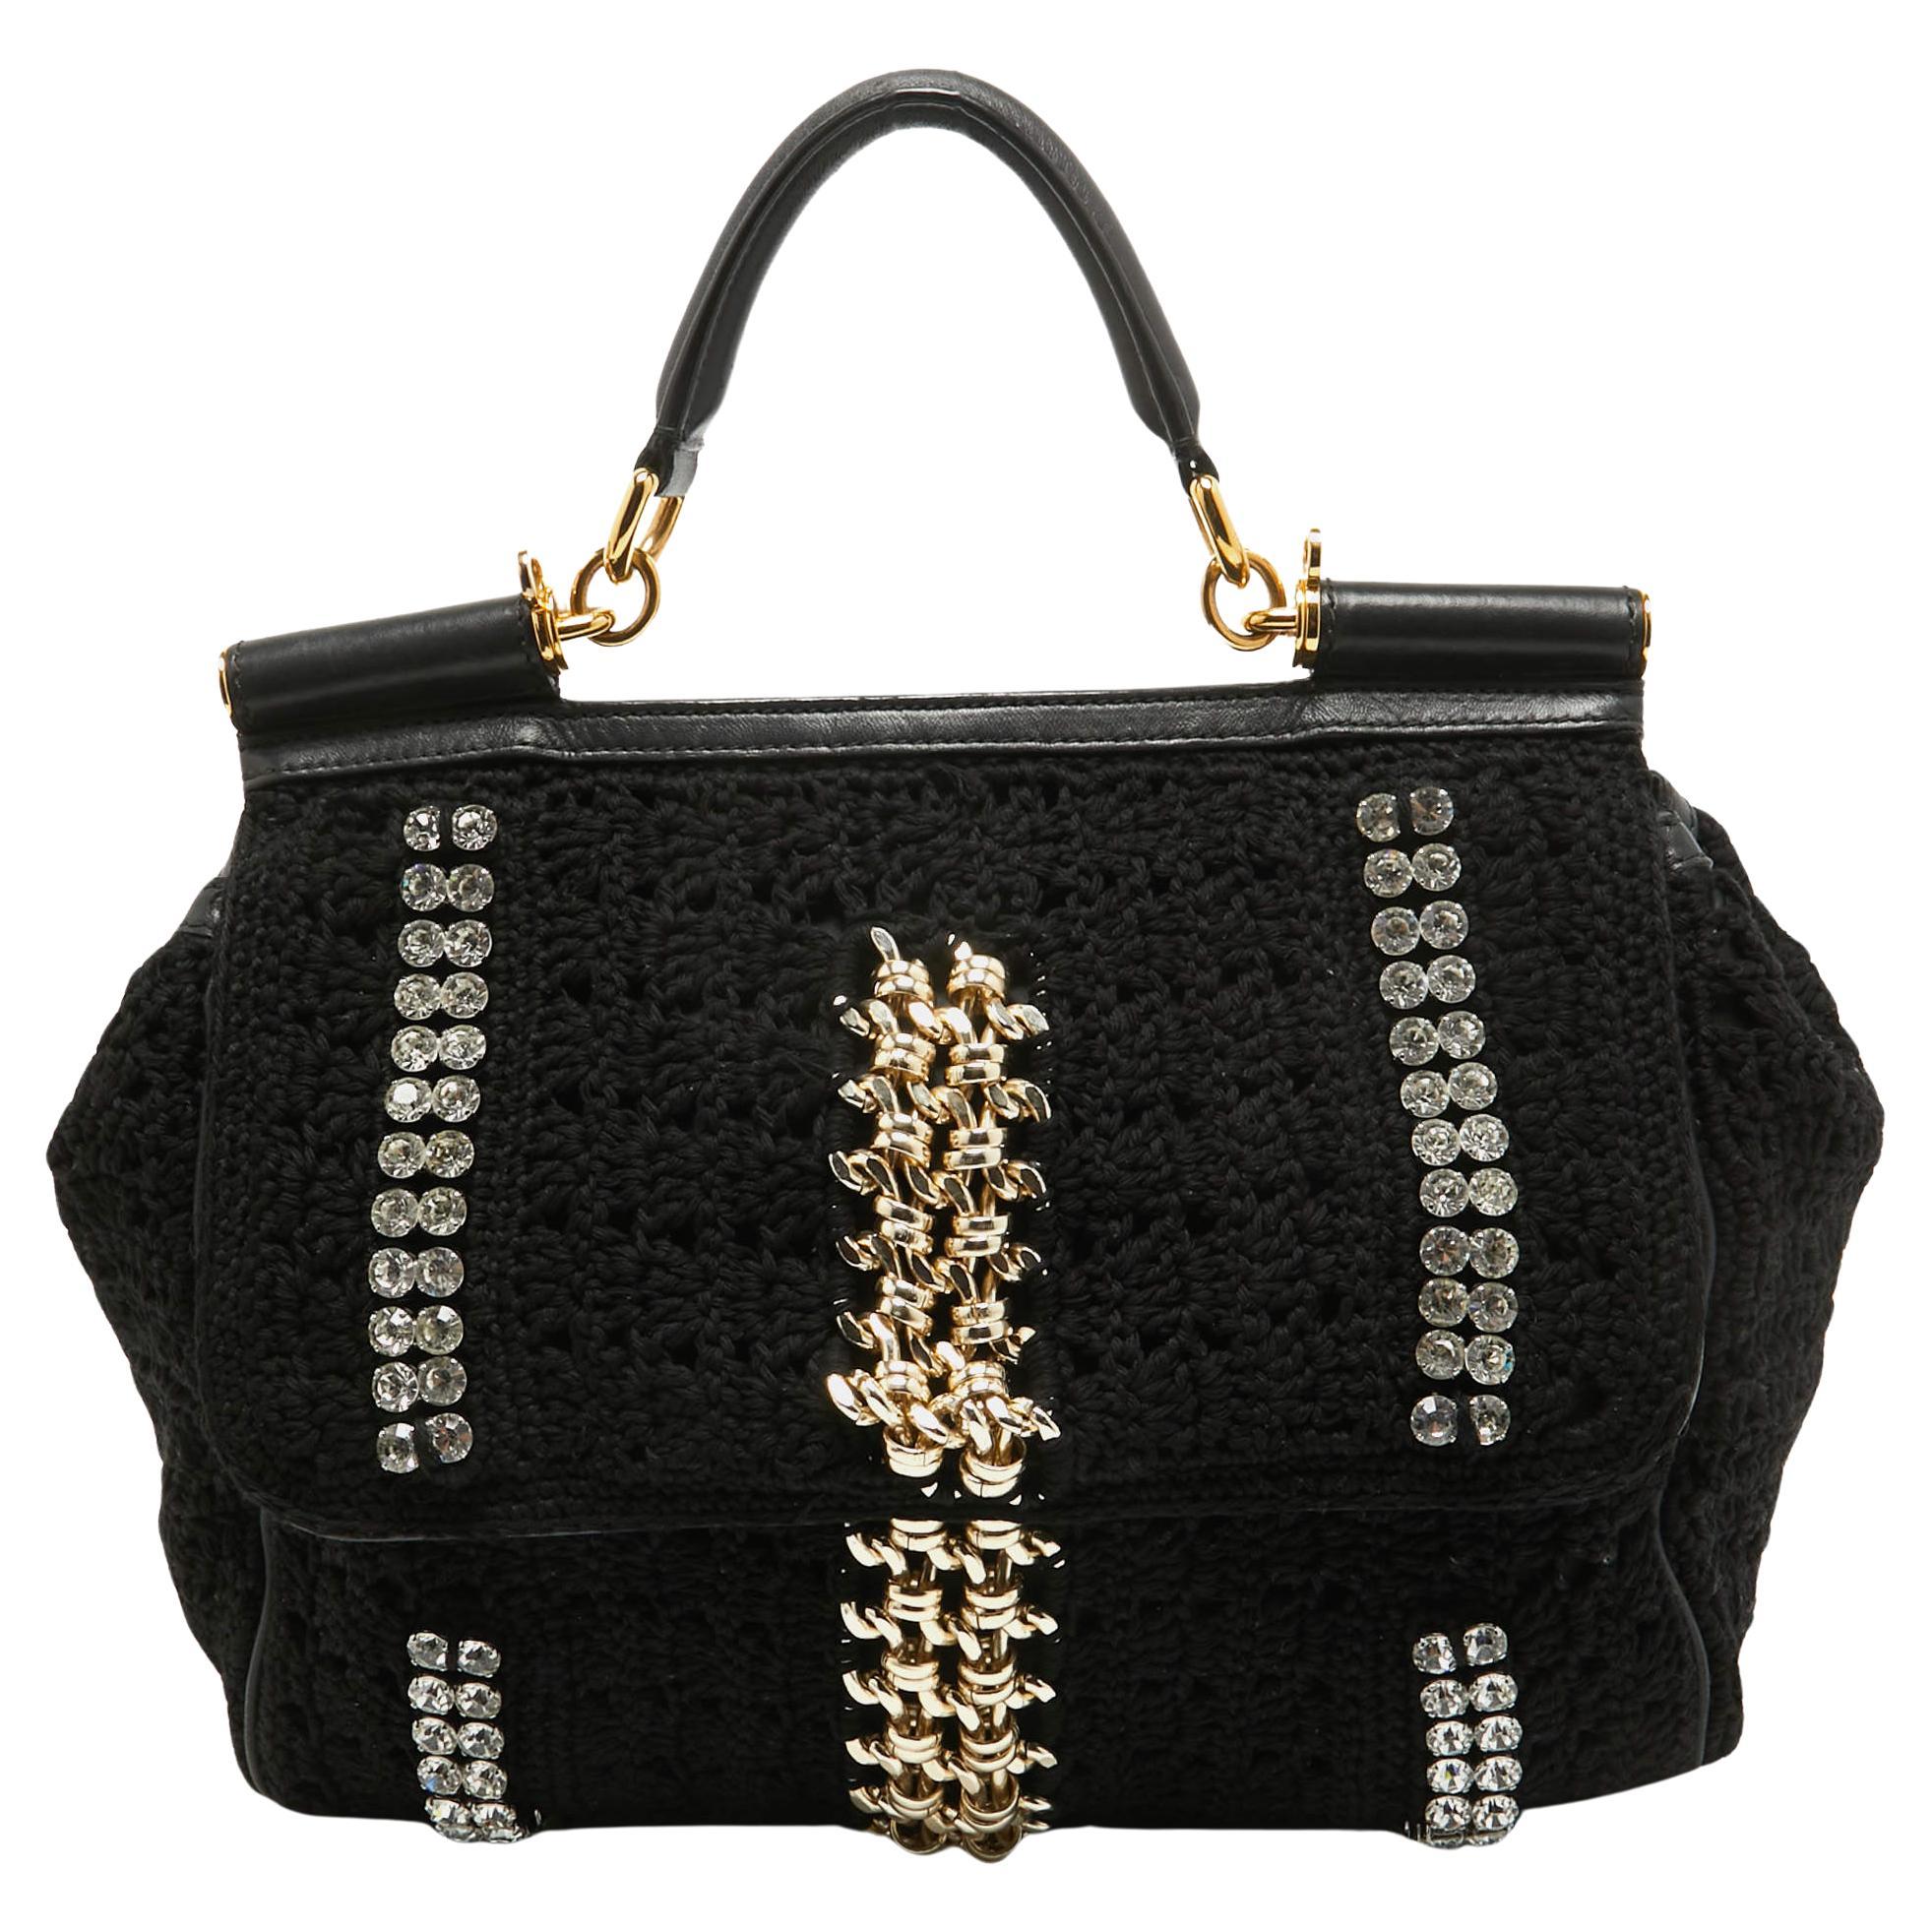 Dolce & Gabbana Crochet Fabric Crystal and Chain Miss Sicily Top Handle Bag